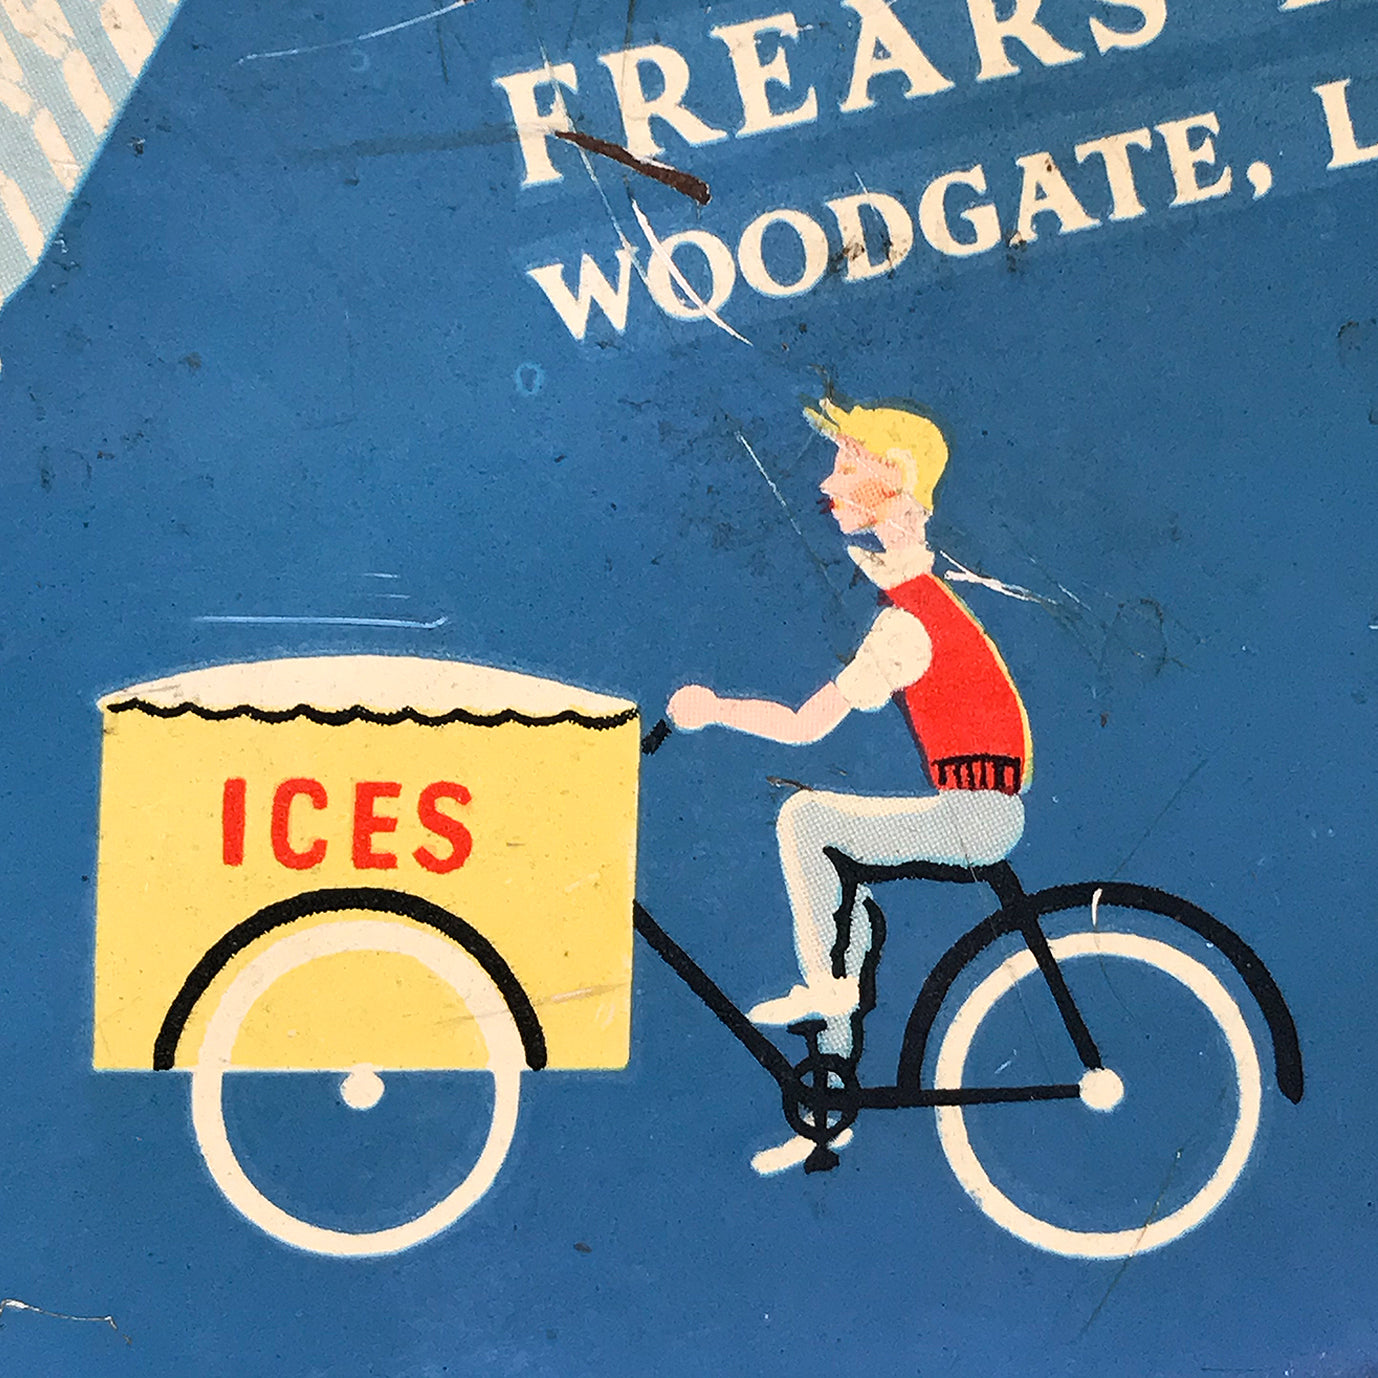 Vintage Frears London Town Biscuit Tin with delightful vignette illustrations of London life from the 50's. There's a Pearly King & Queen having a jig, an Elephant taking some children for a ride, people taking the tube and a whole lot more! SHOP NOW - www.intovintage.co.uk